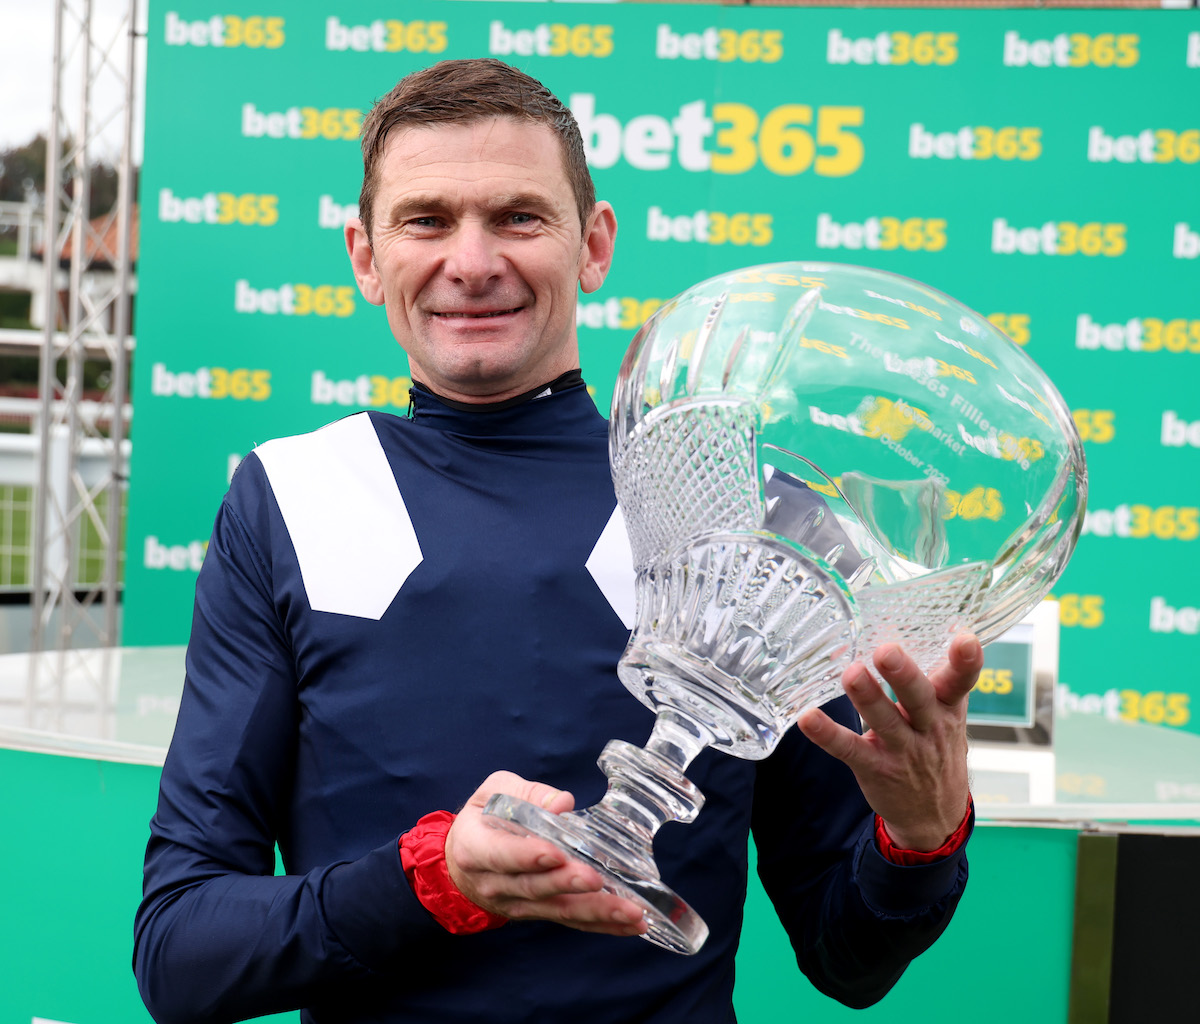 Crystal days: Robert Havlin with a nice piece of glass after his G1 breakthrough on the Rowley Mile. Photo: Dan Abraham / focusonracing.com